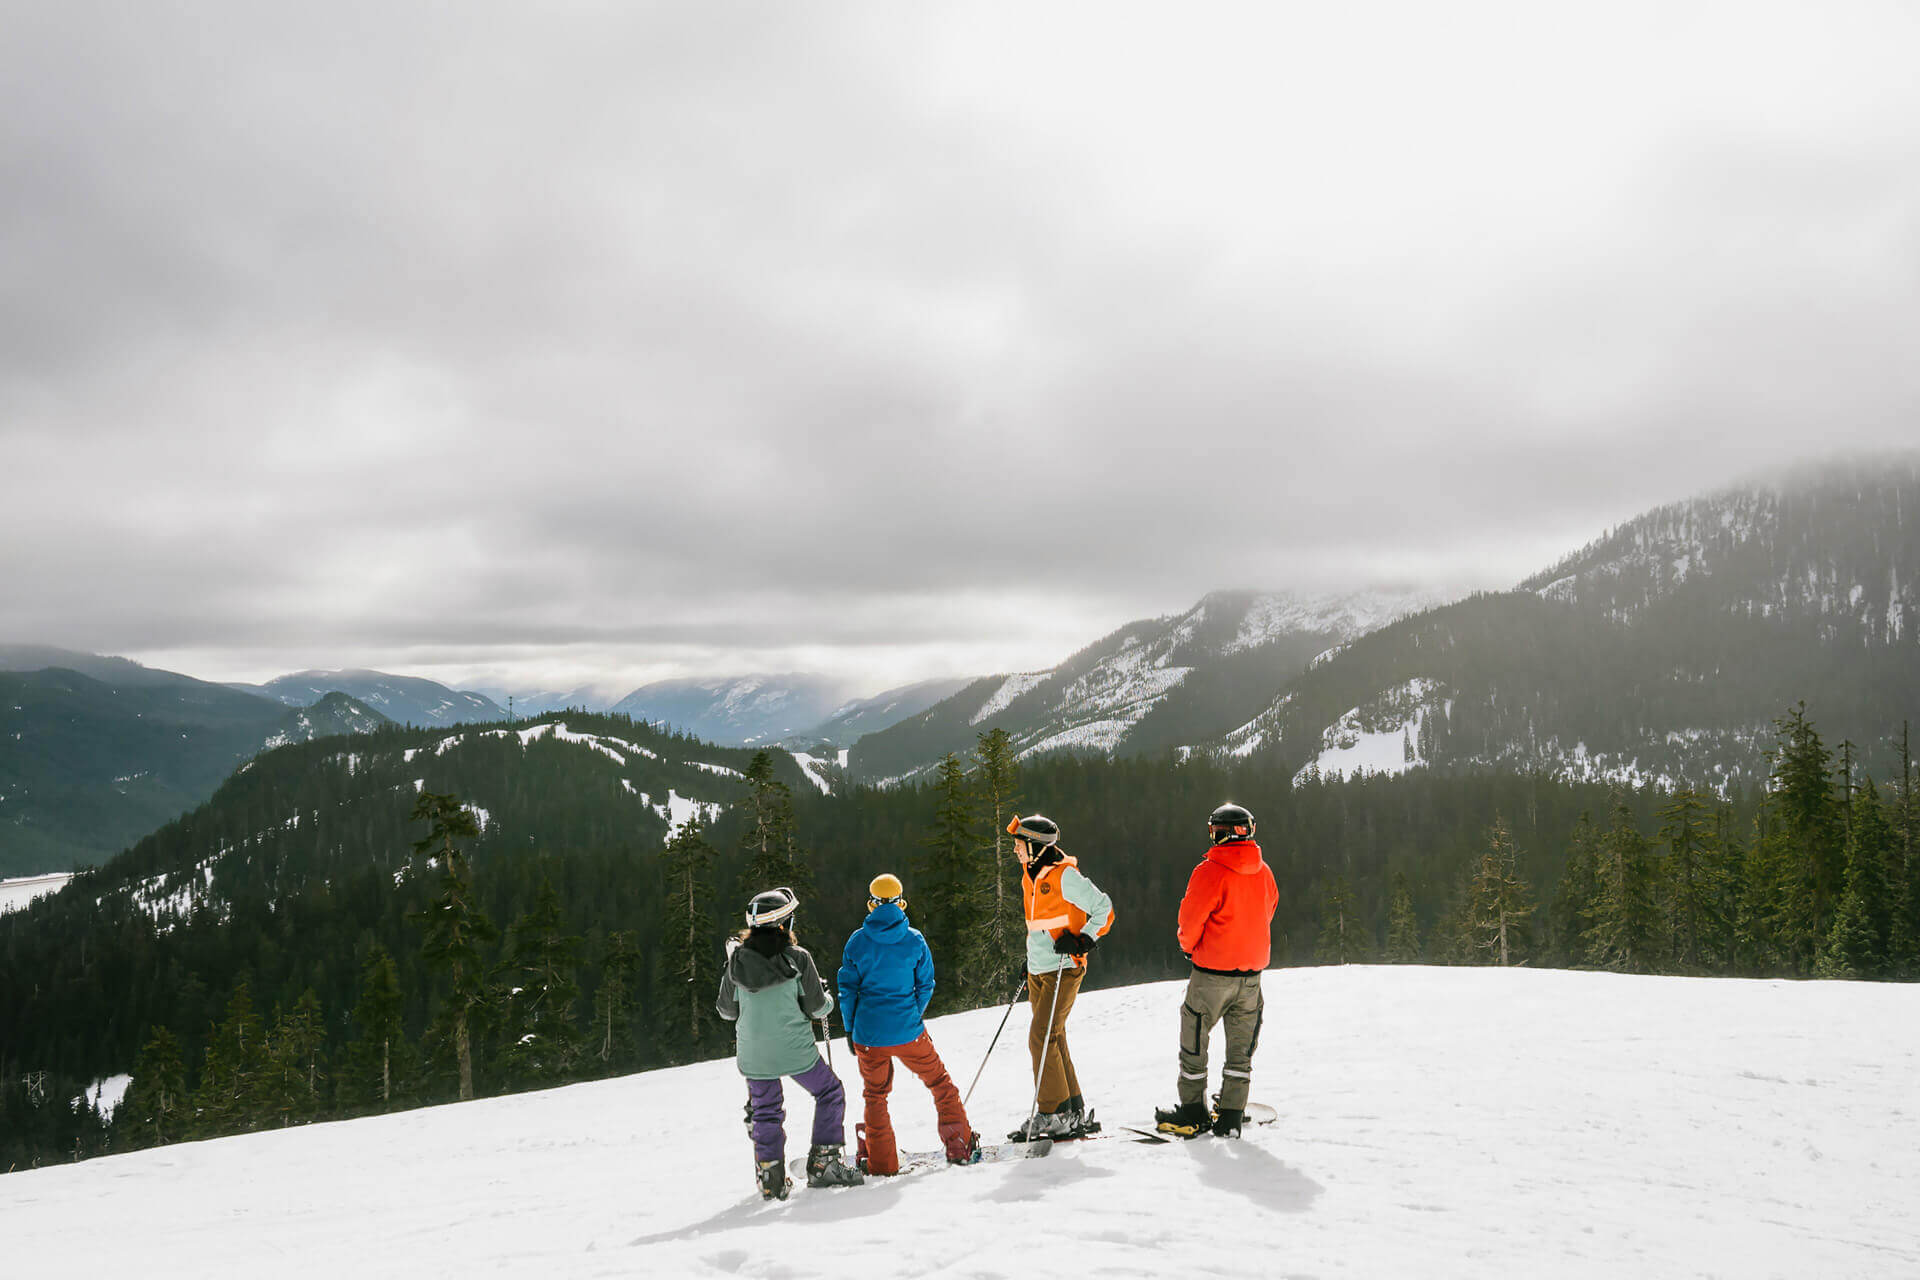 Two couples pause from snowboarding to look over the snowy landscape